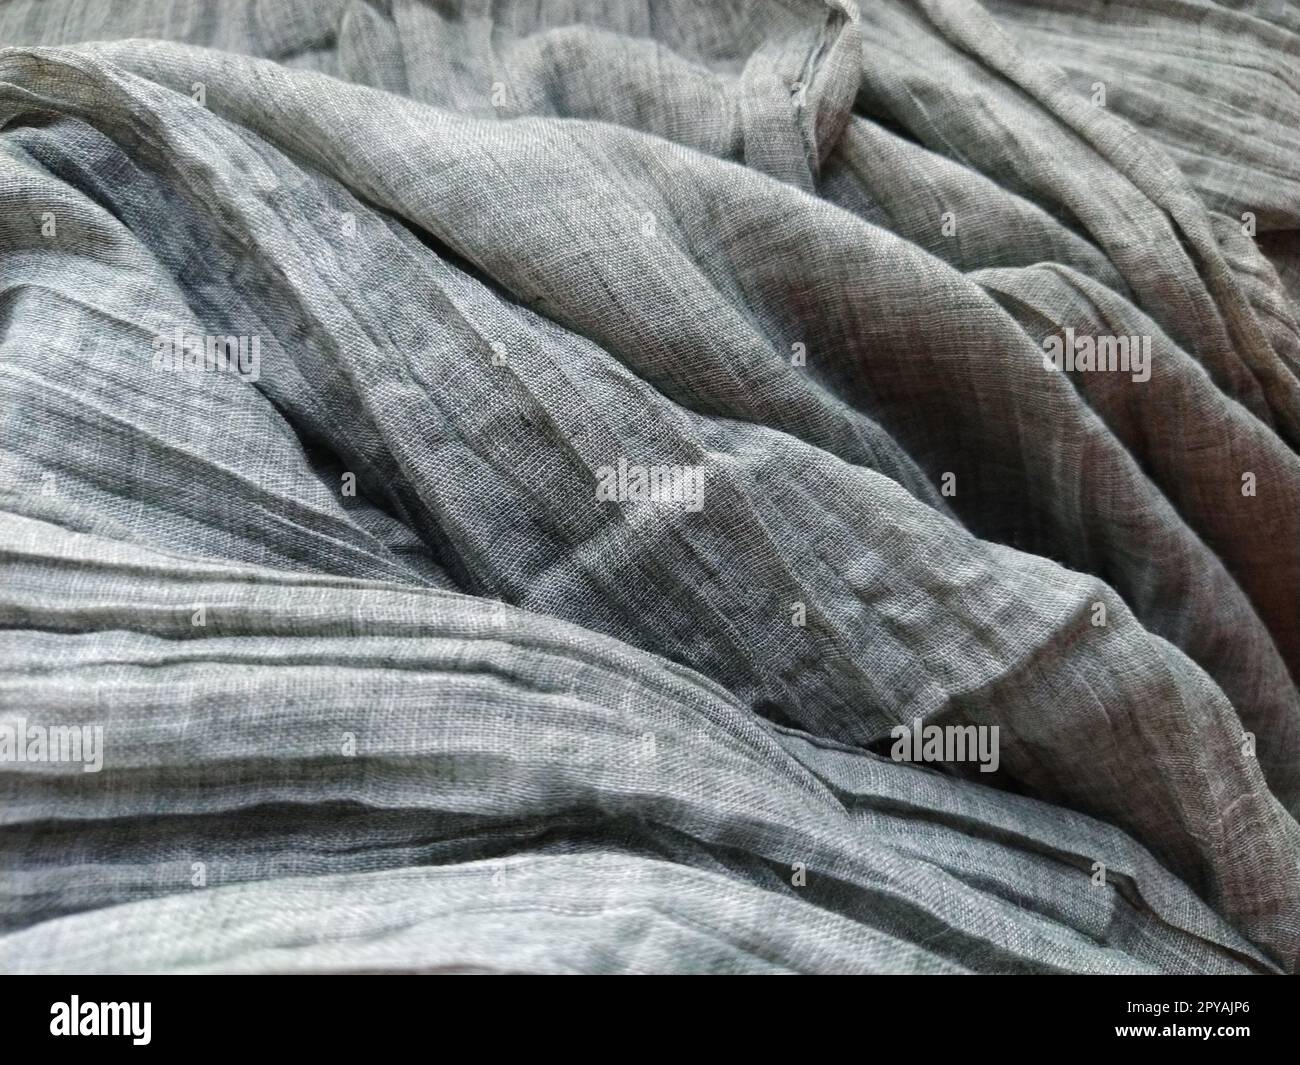 Fabric sheer curtain fabric. Beautiful gray color. The curtain material is carelessly folded and wrinkled. Fabric sample. Interior design option. Stock Photo